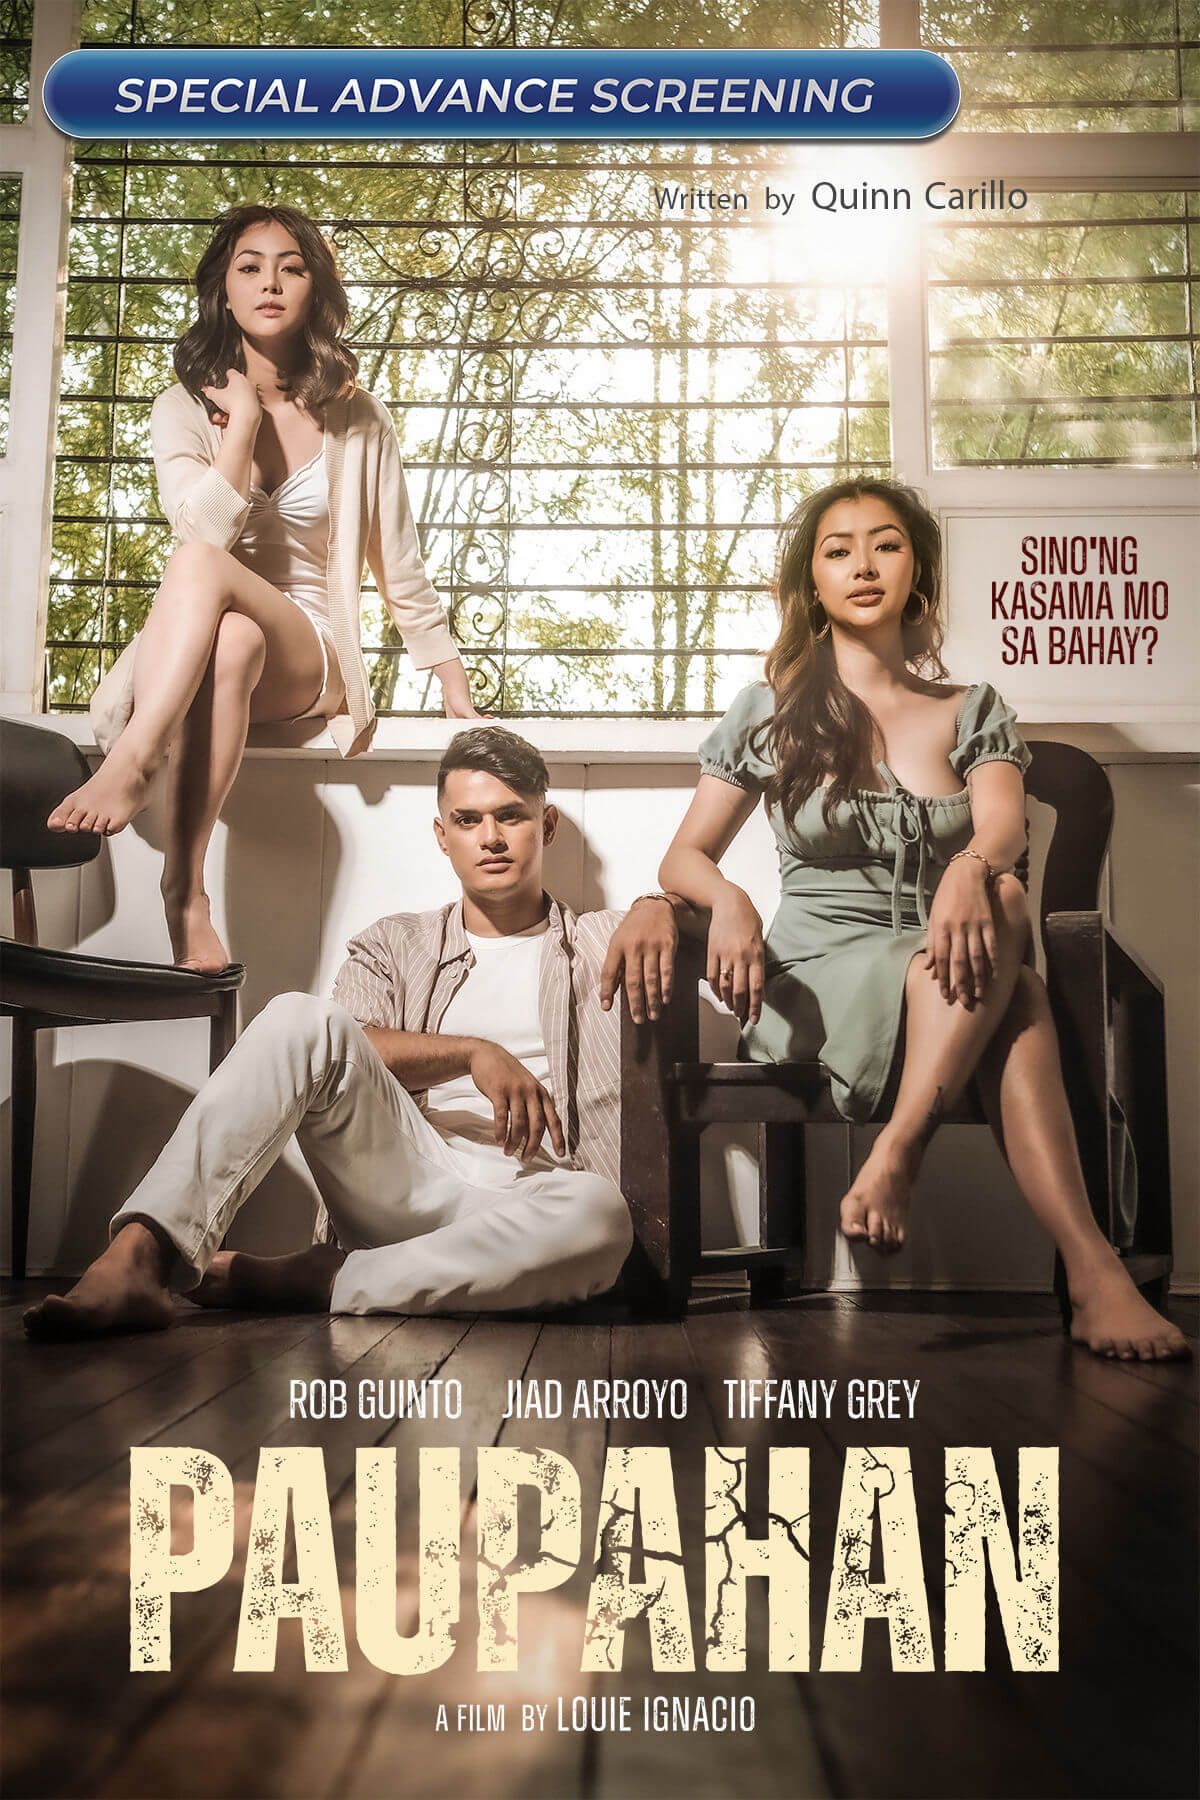 Paupahan Movie (2023) Cast, Release Date, Story, Vivamax, Poster, Trailer, Review